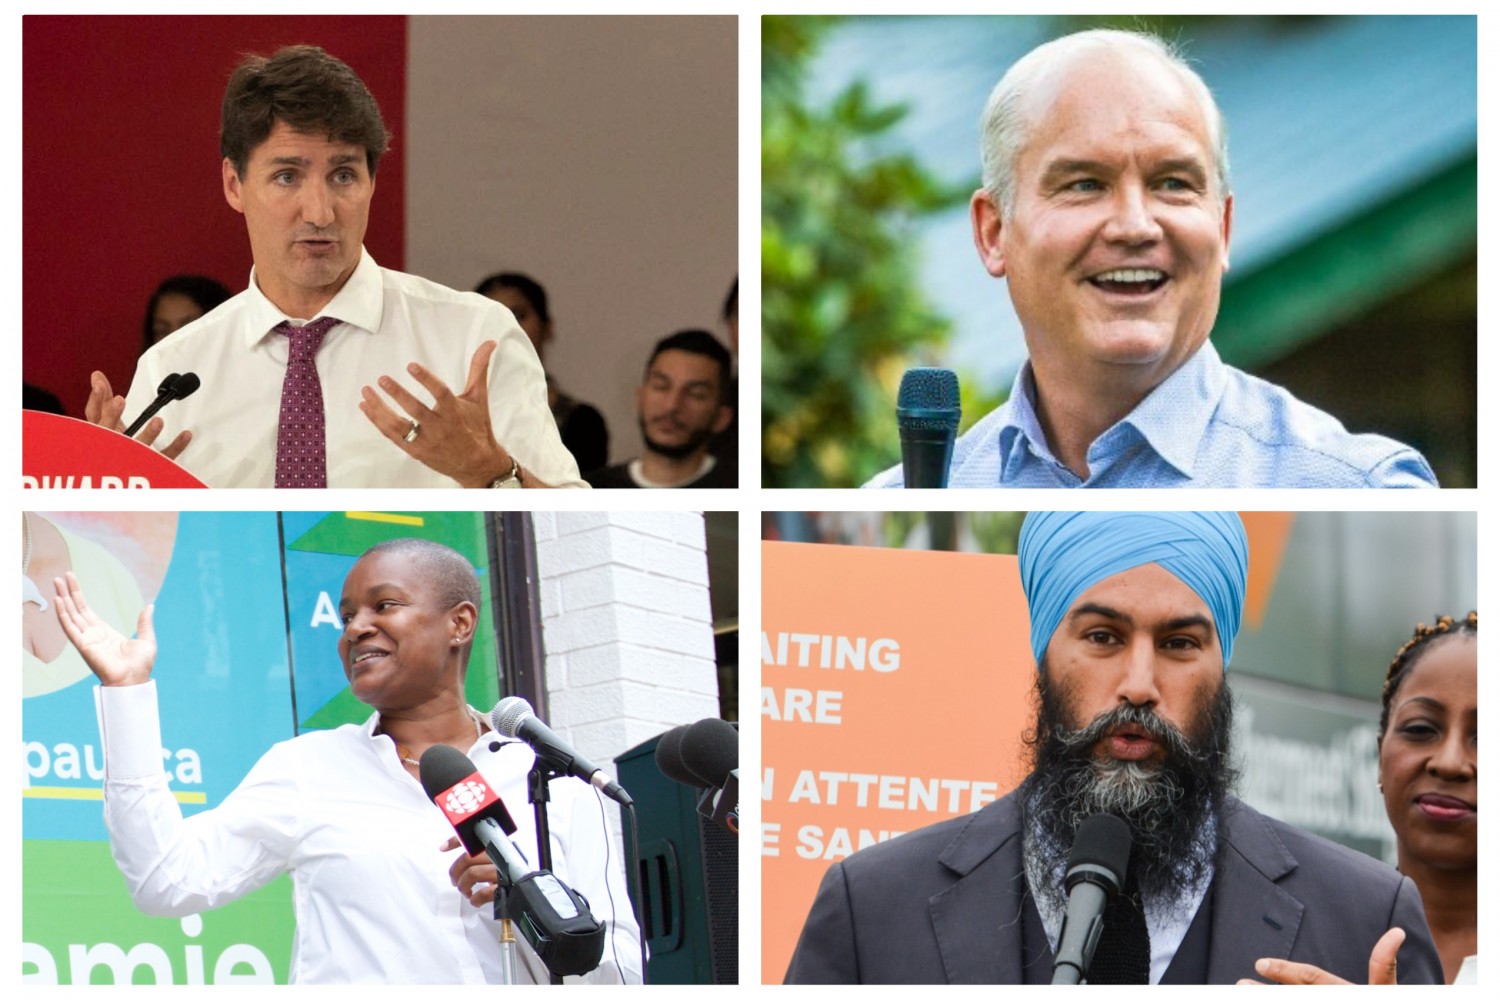 Candidate slates filling out as parties look to break through Liberal fortress in Brampton and Mississauga 